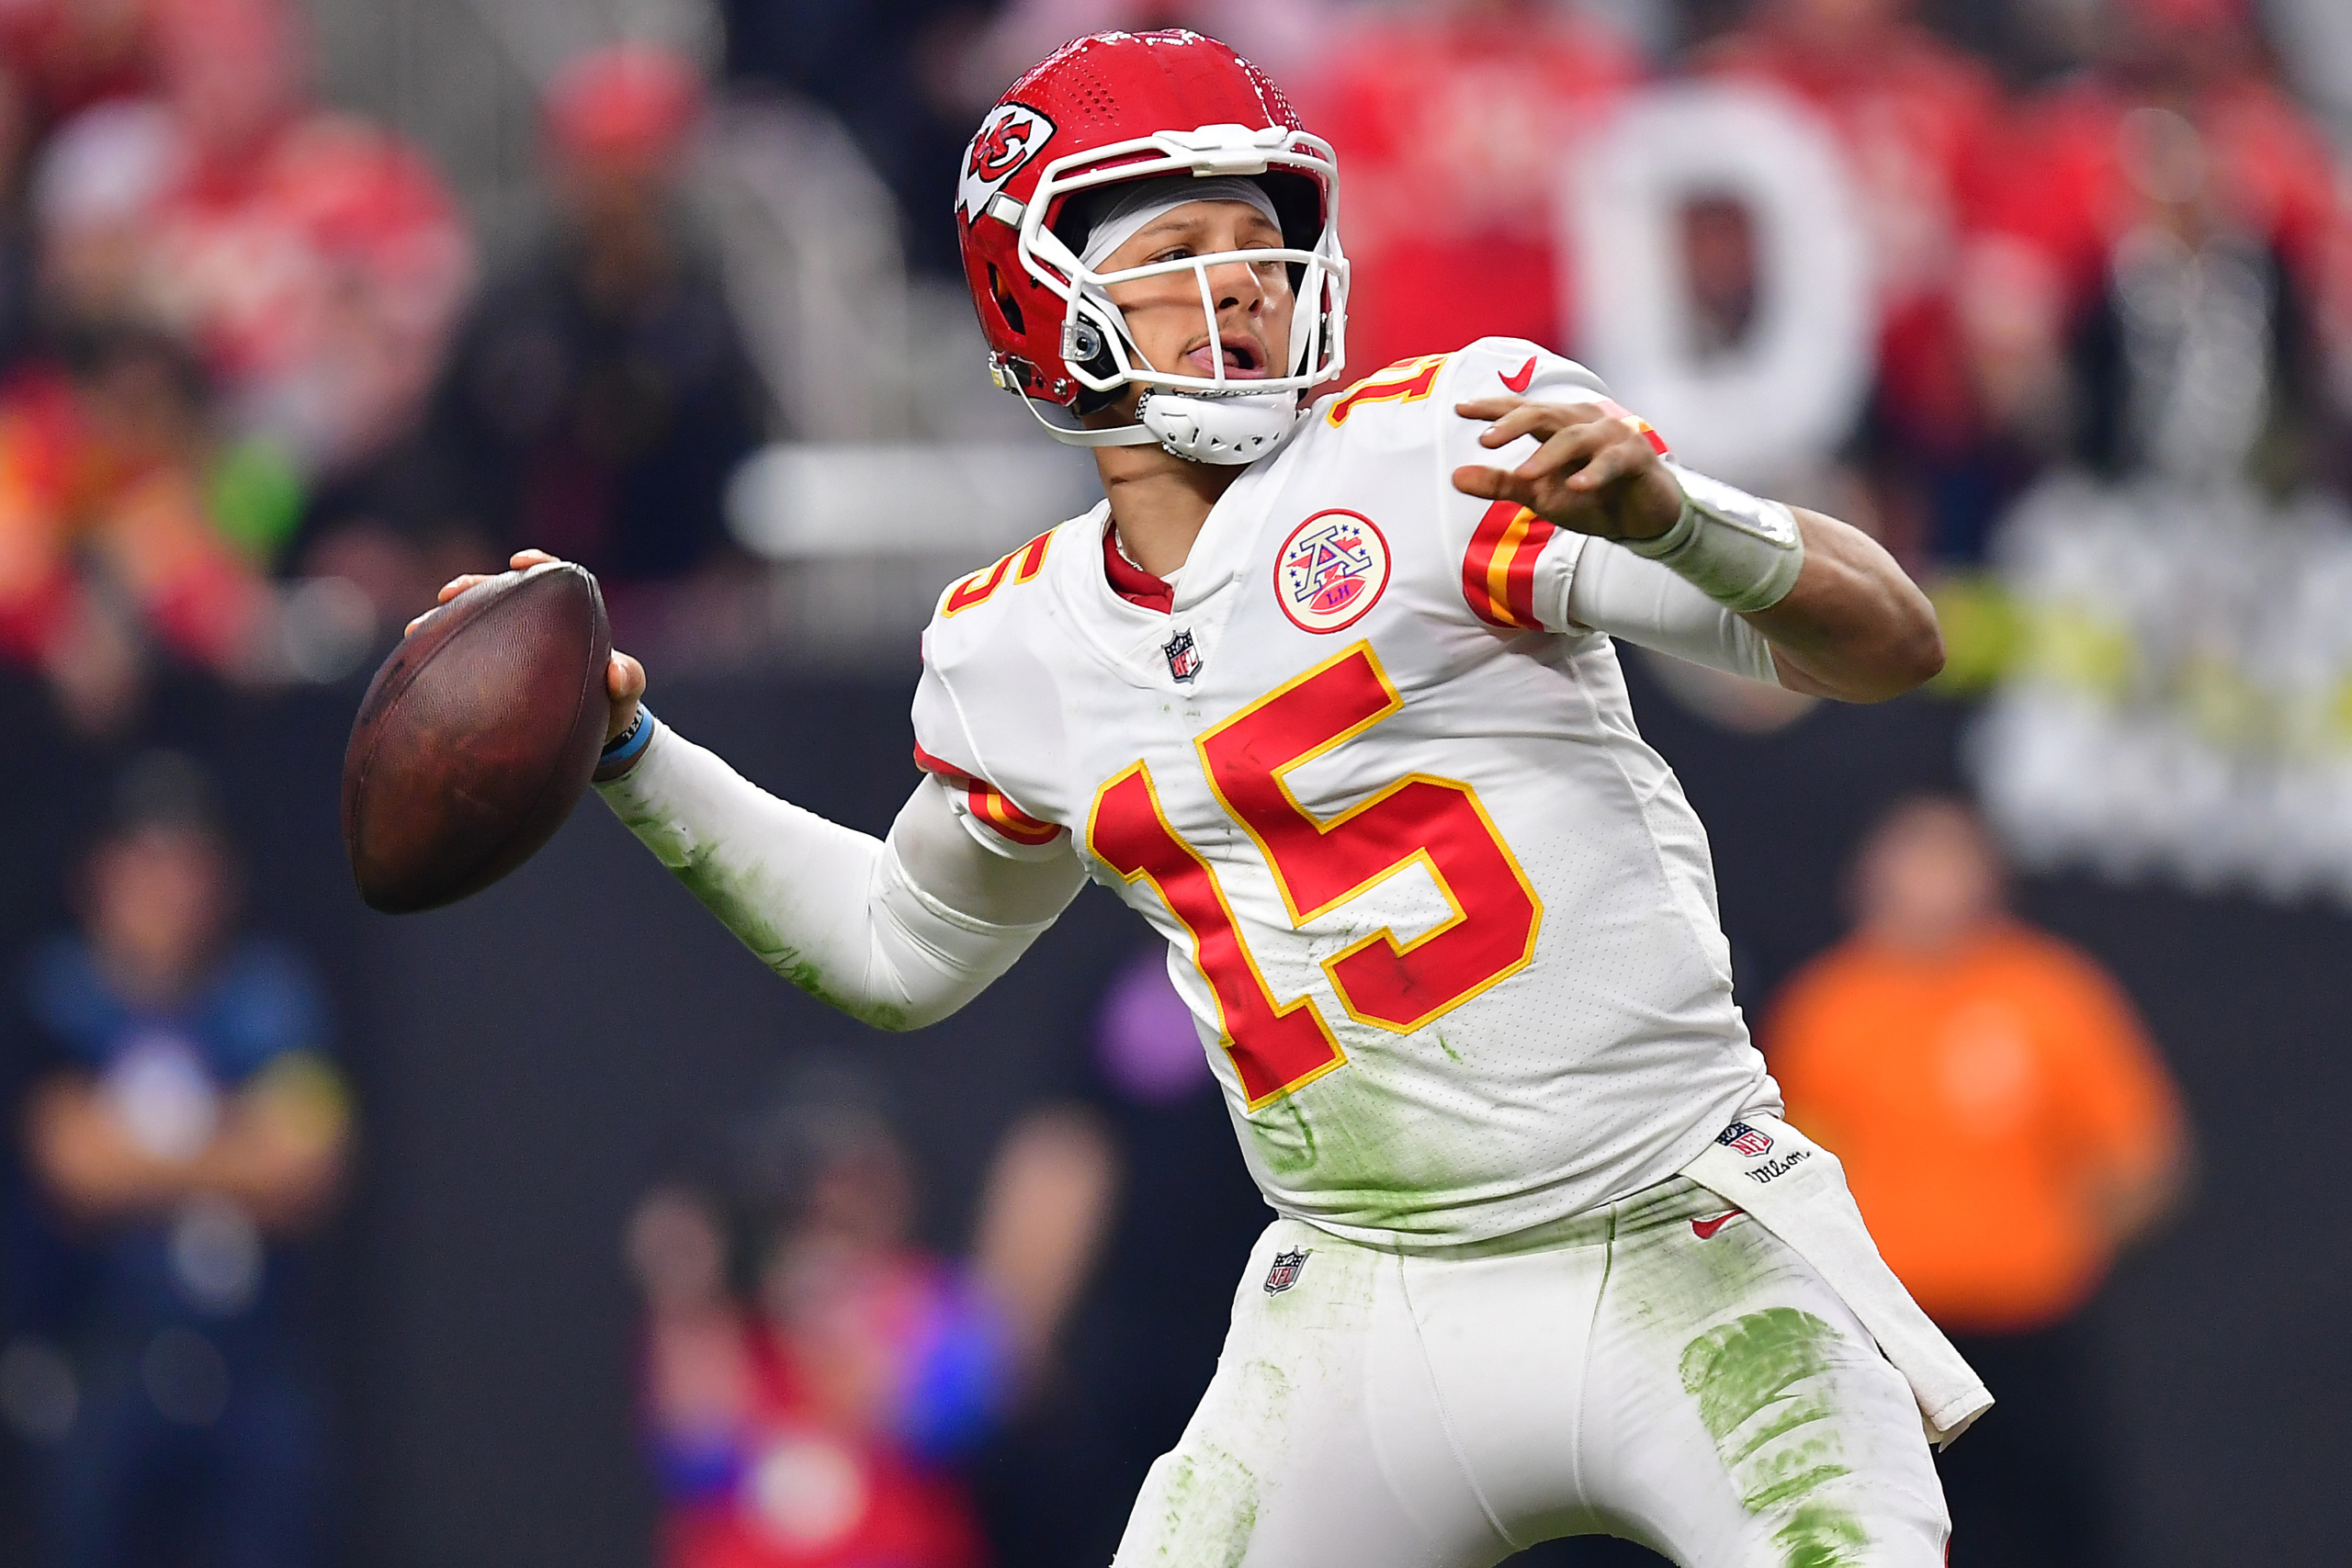 Chiefs vs Bills AFC finals: stats, standings, players comparison - AS USA